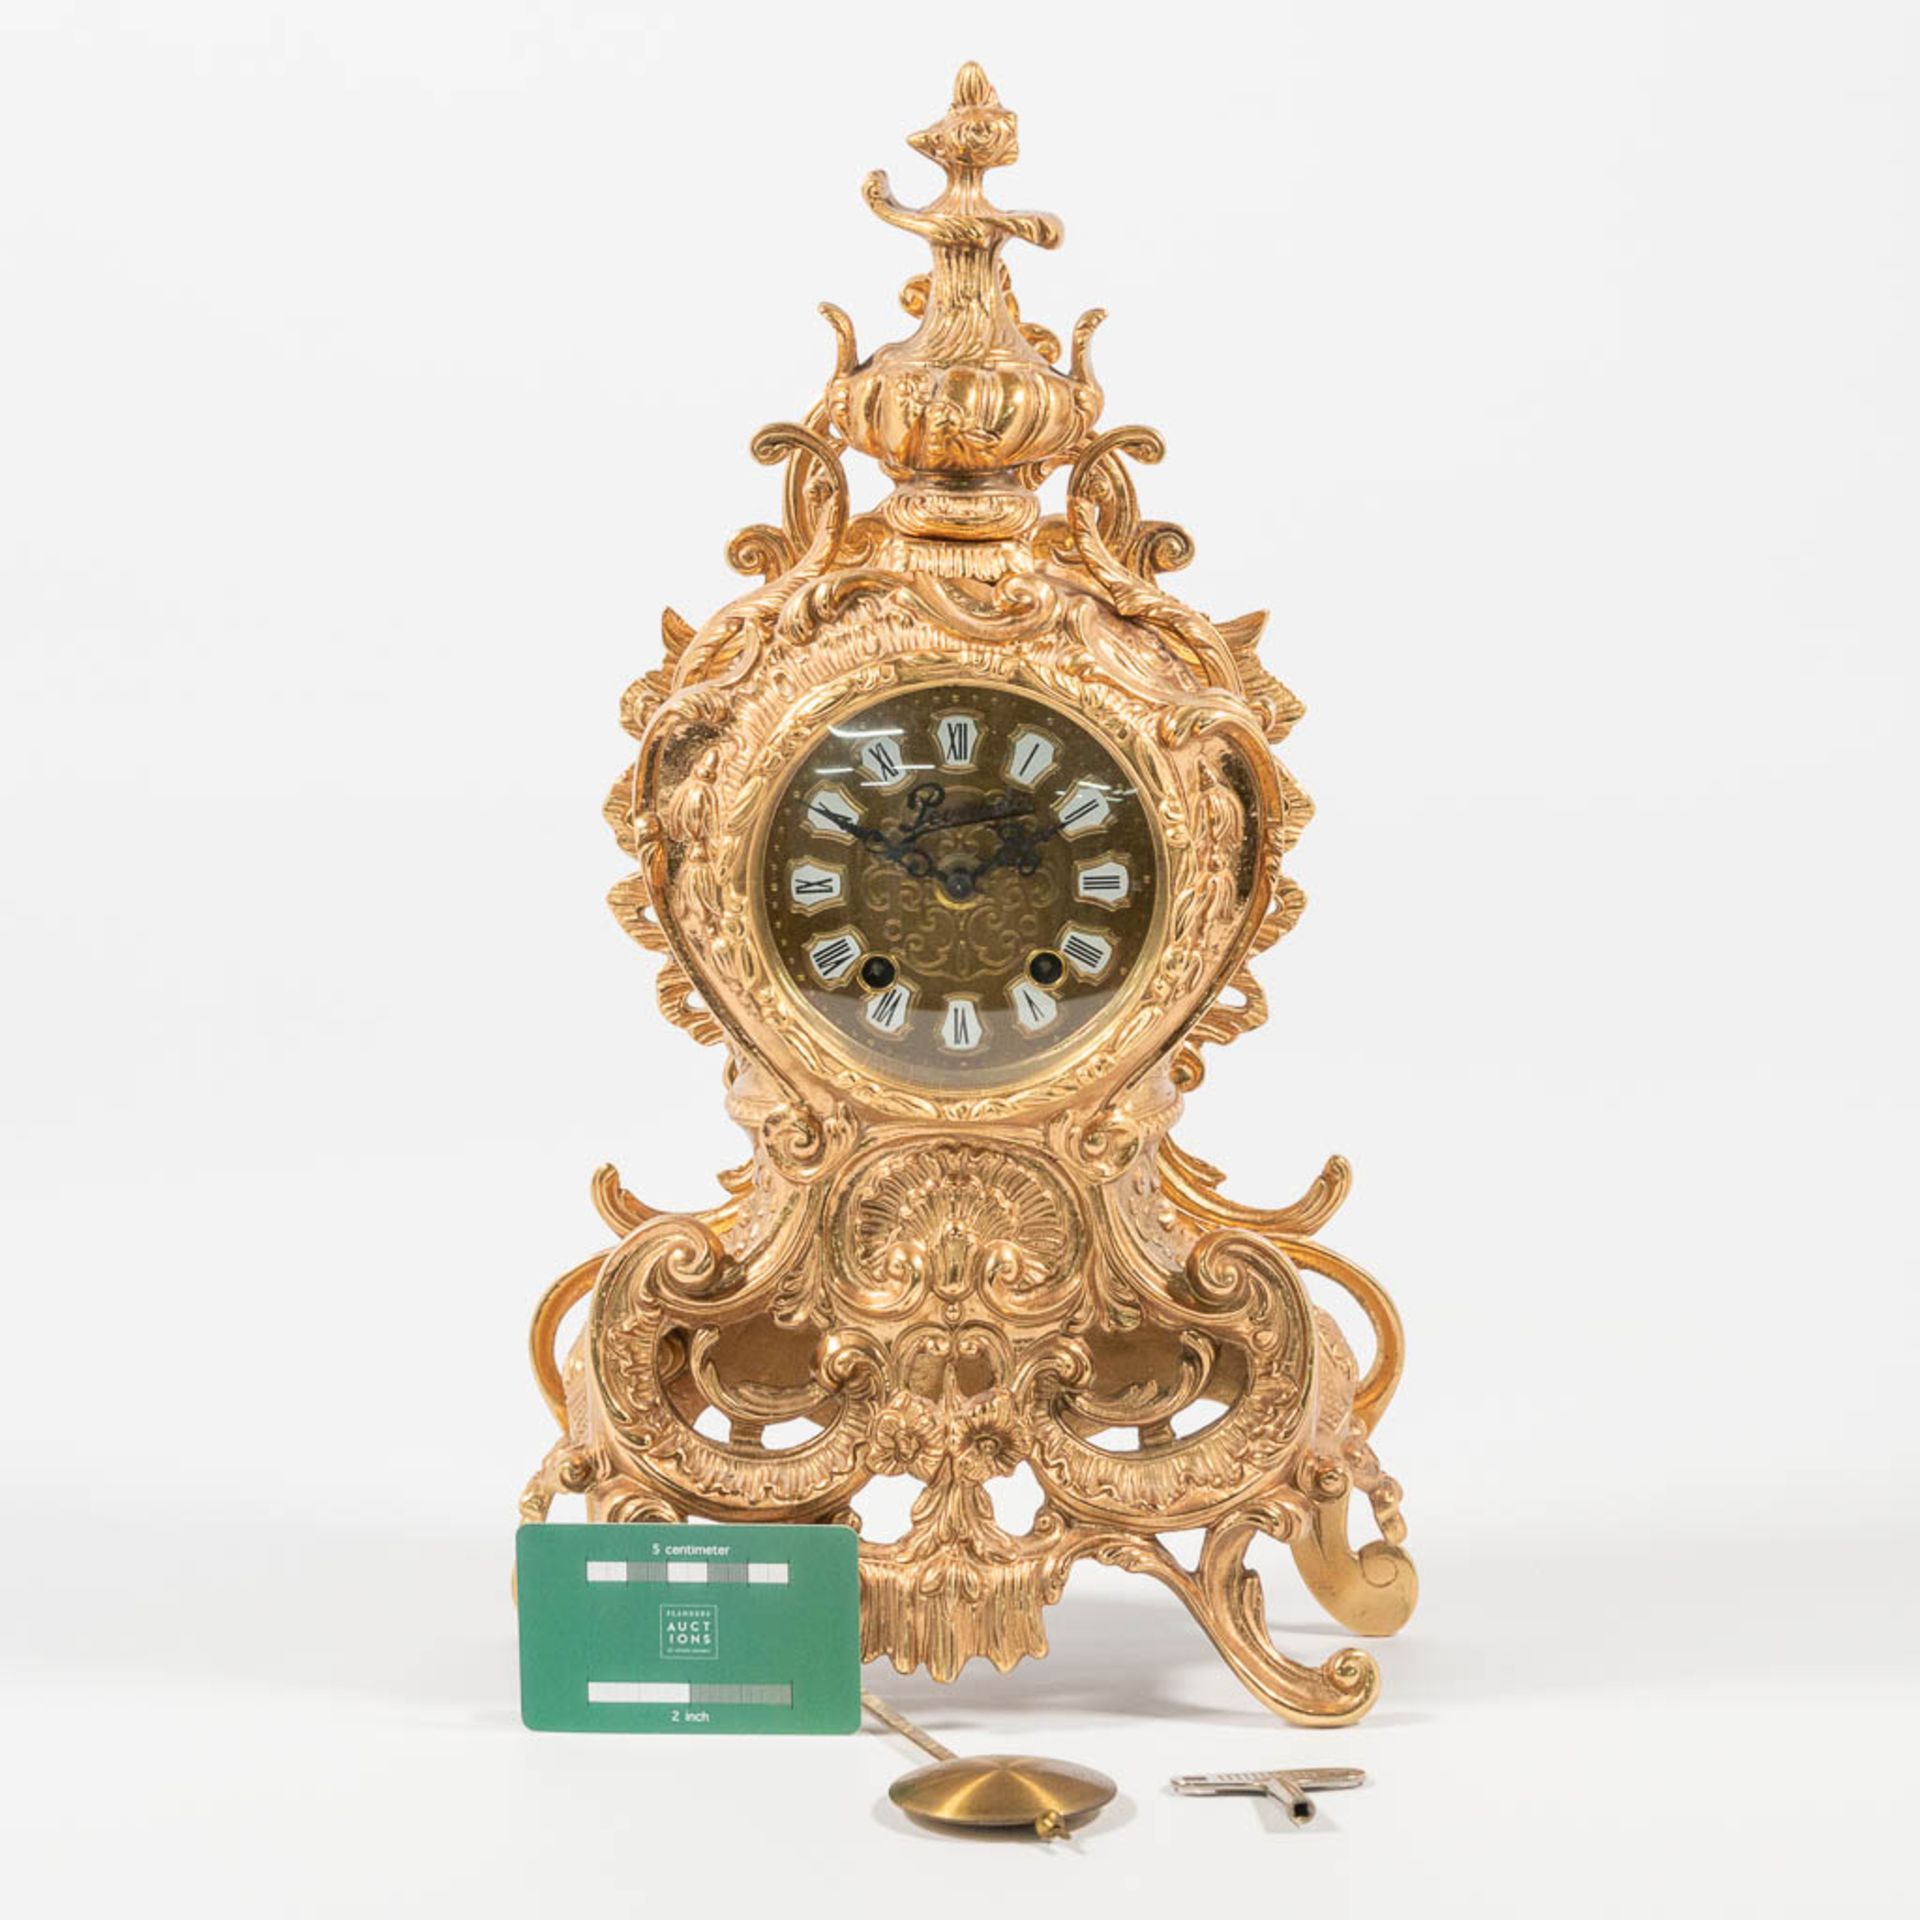 A vintage bronze clock 'Pevanda' with mechanical movement, made around 1970. - Image 12 of 19